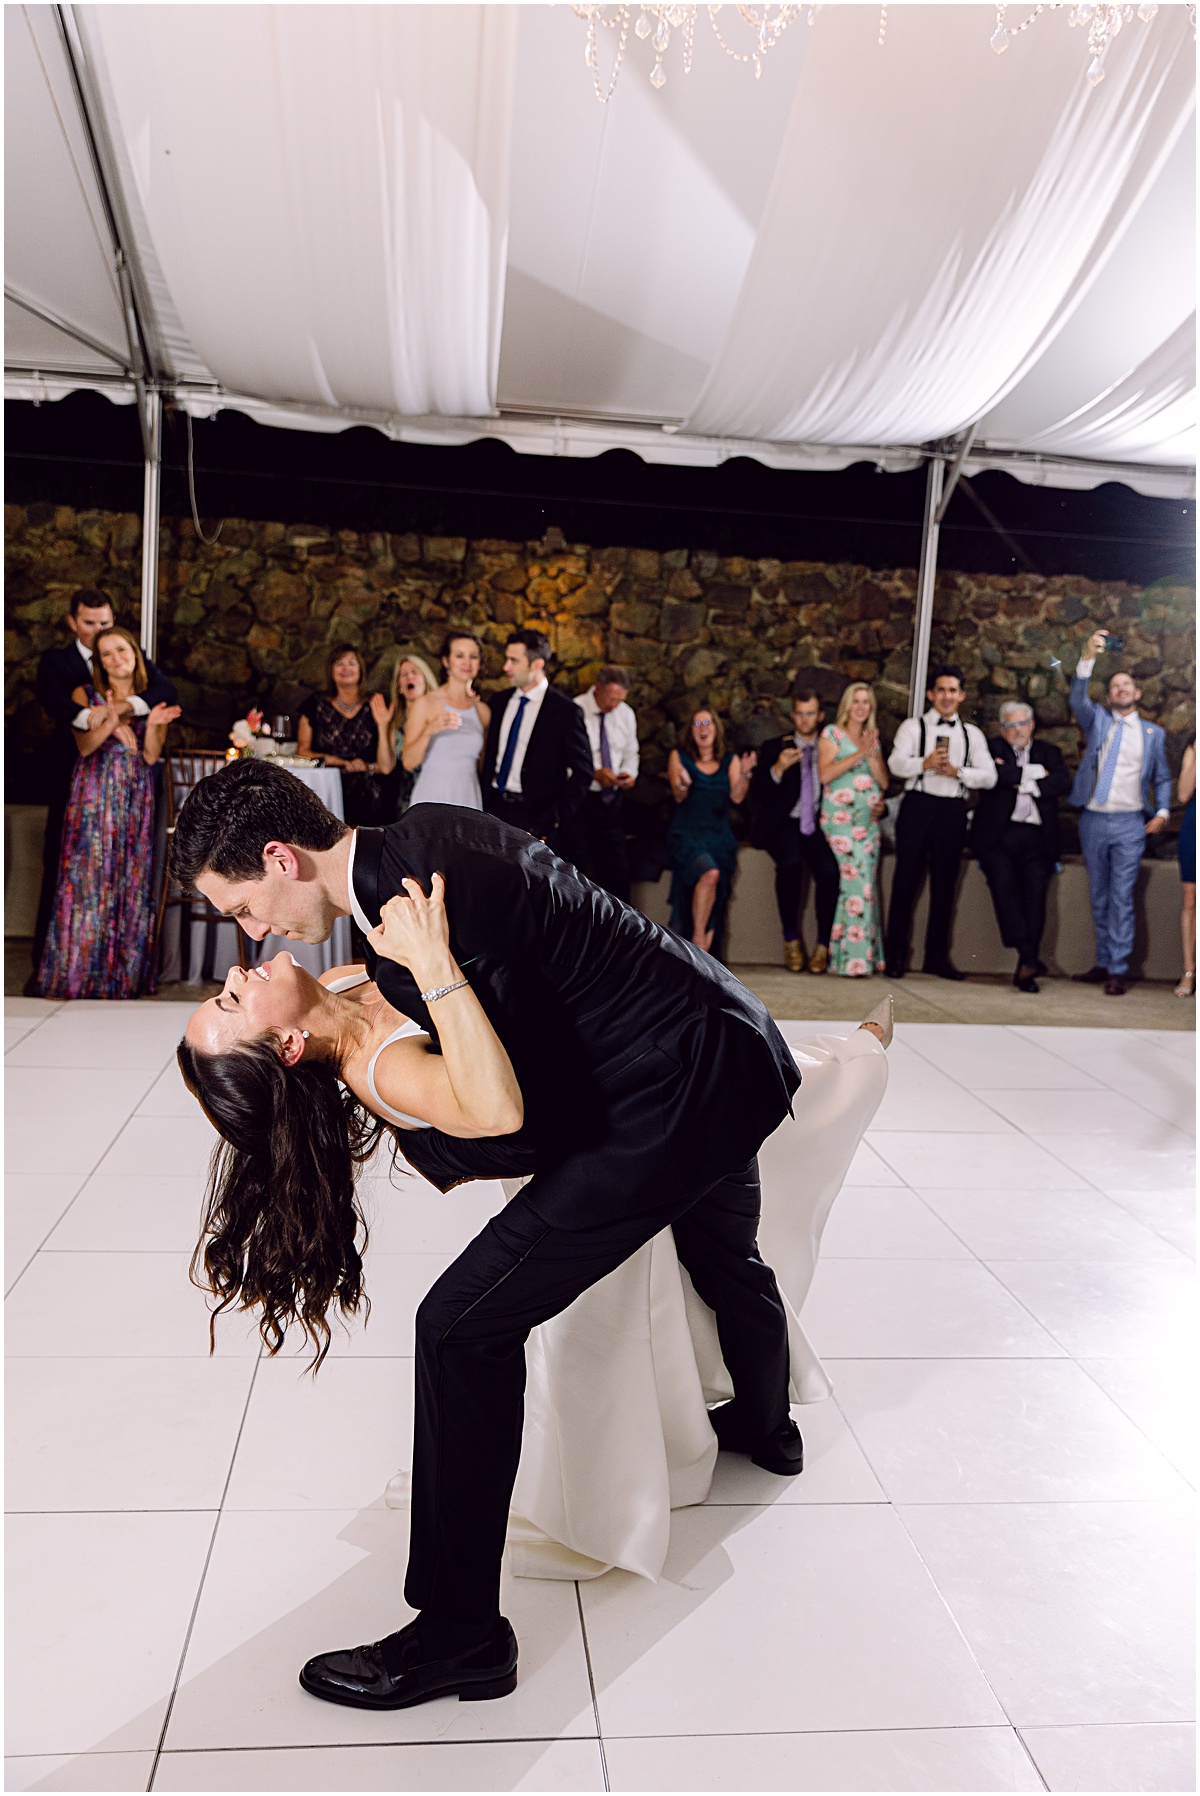 First dance. Joyful summer wedding at the Inn at Willow Grove by Sarah Bradshaw. Planning by Kelley Cannon Events.